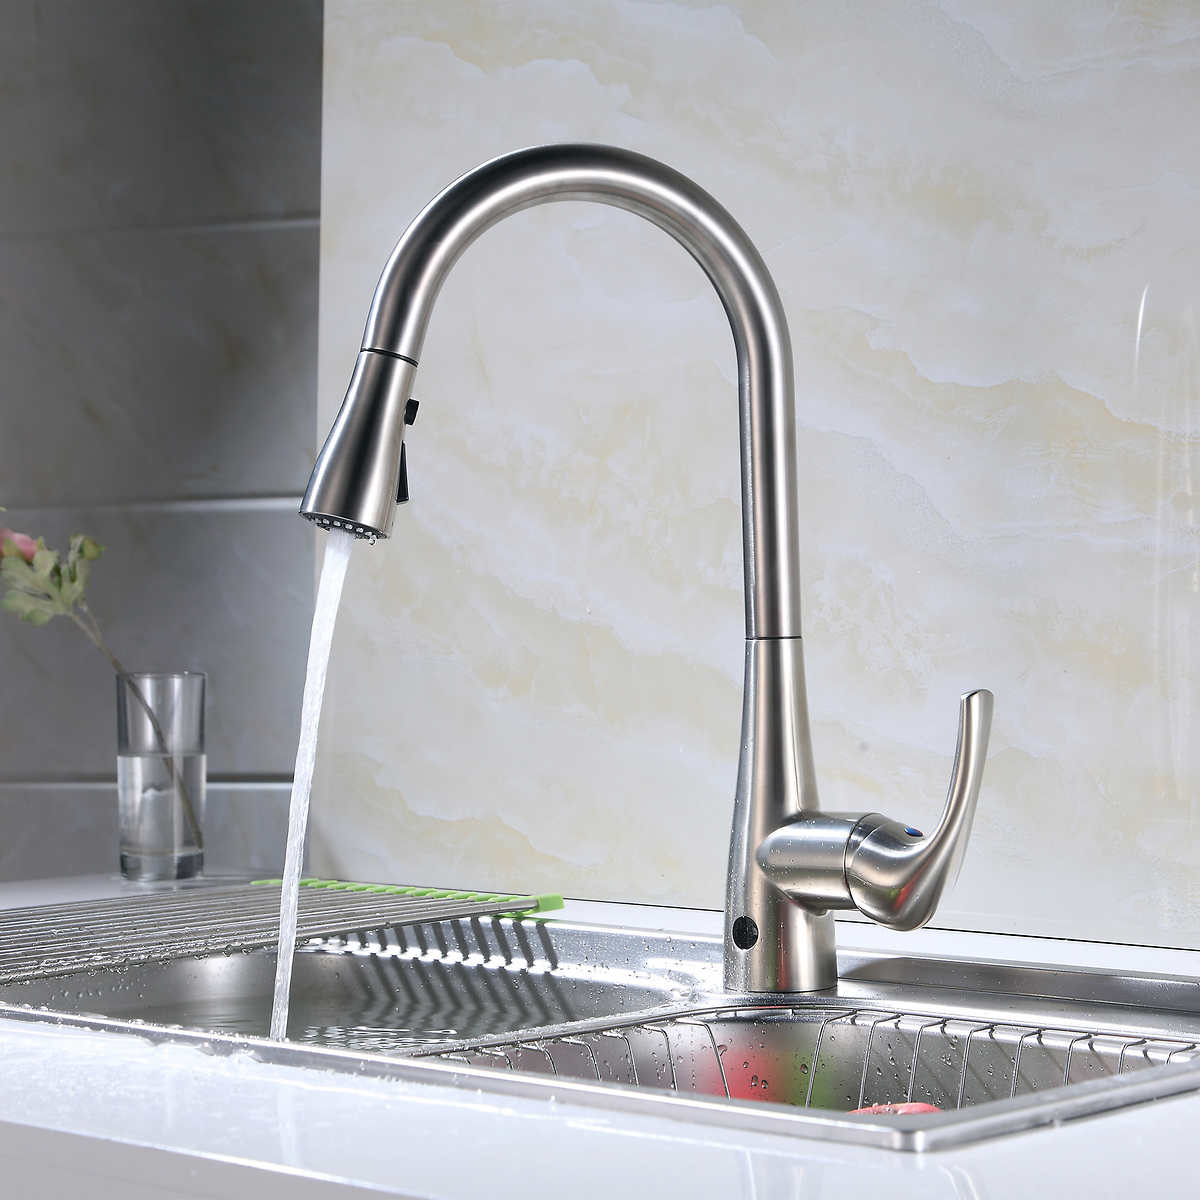 Flow Motion Activated Pull Down Kitchen Faucet